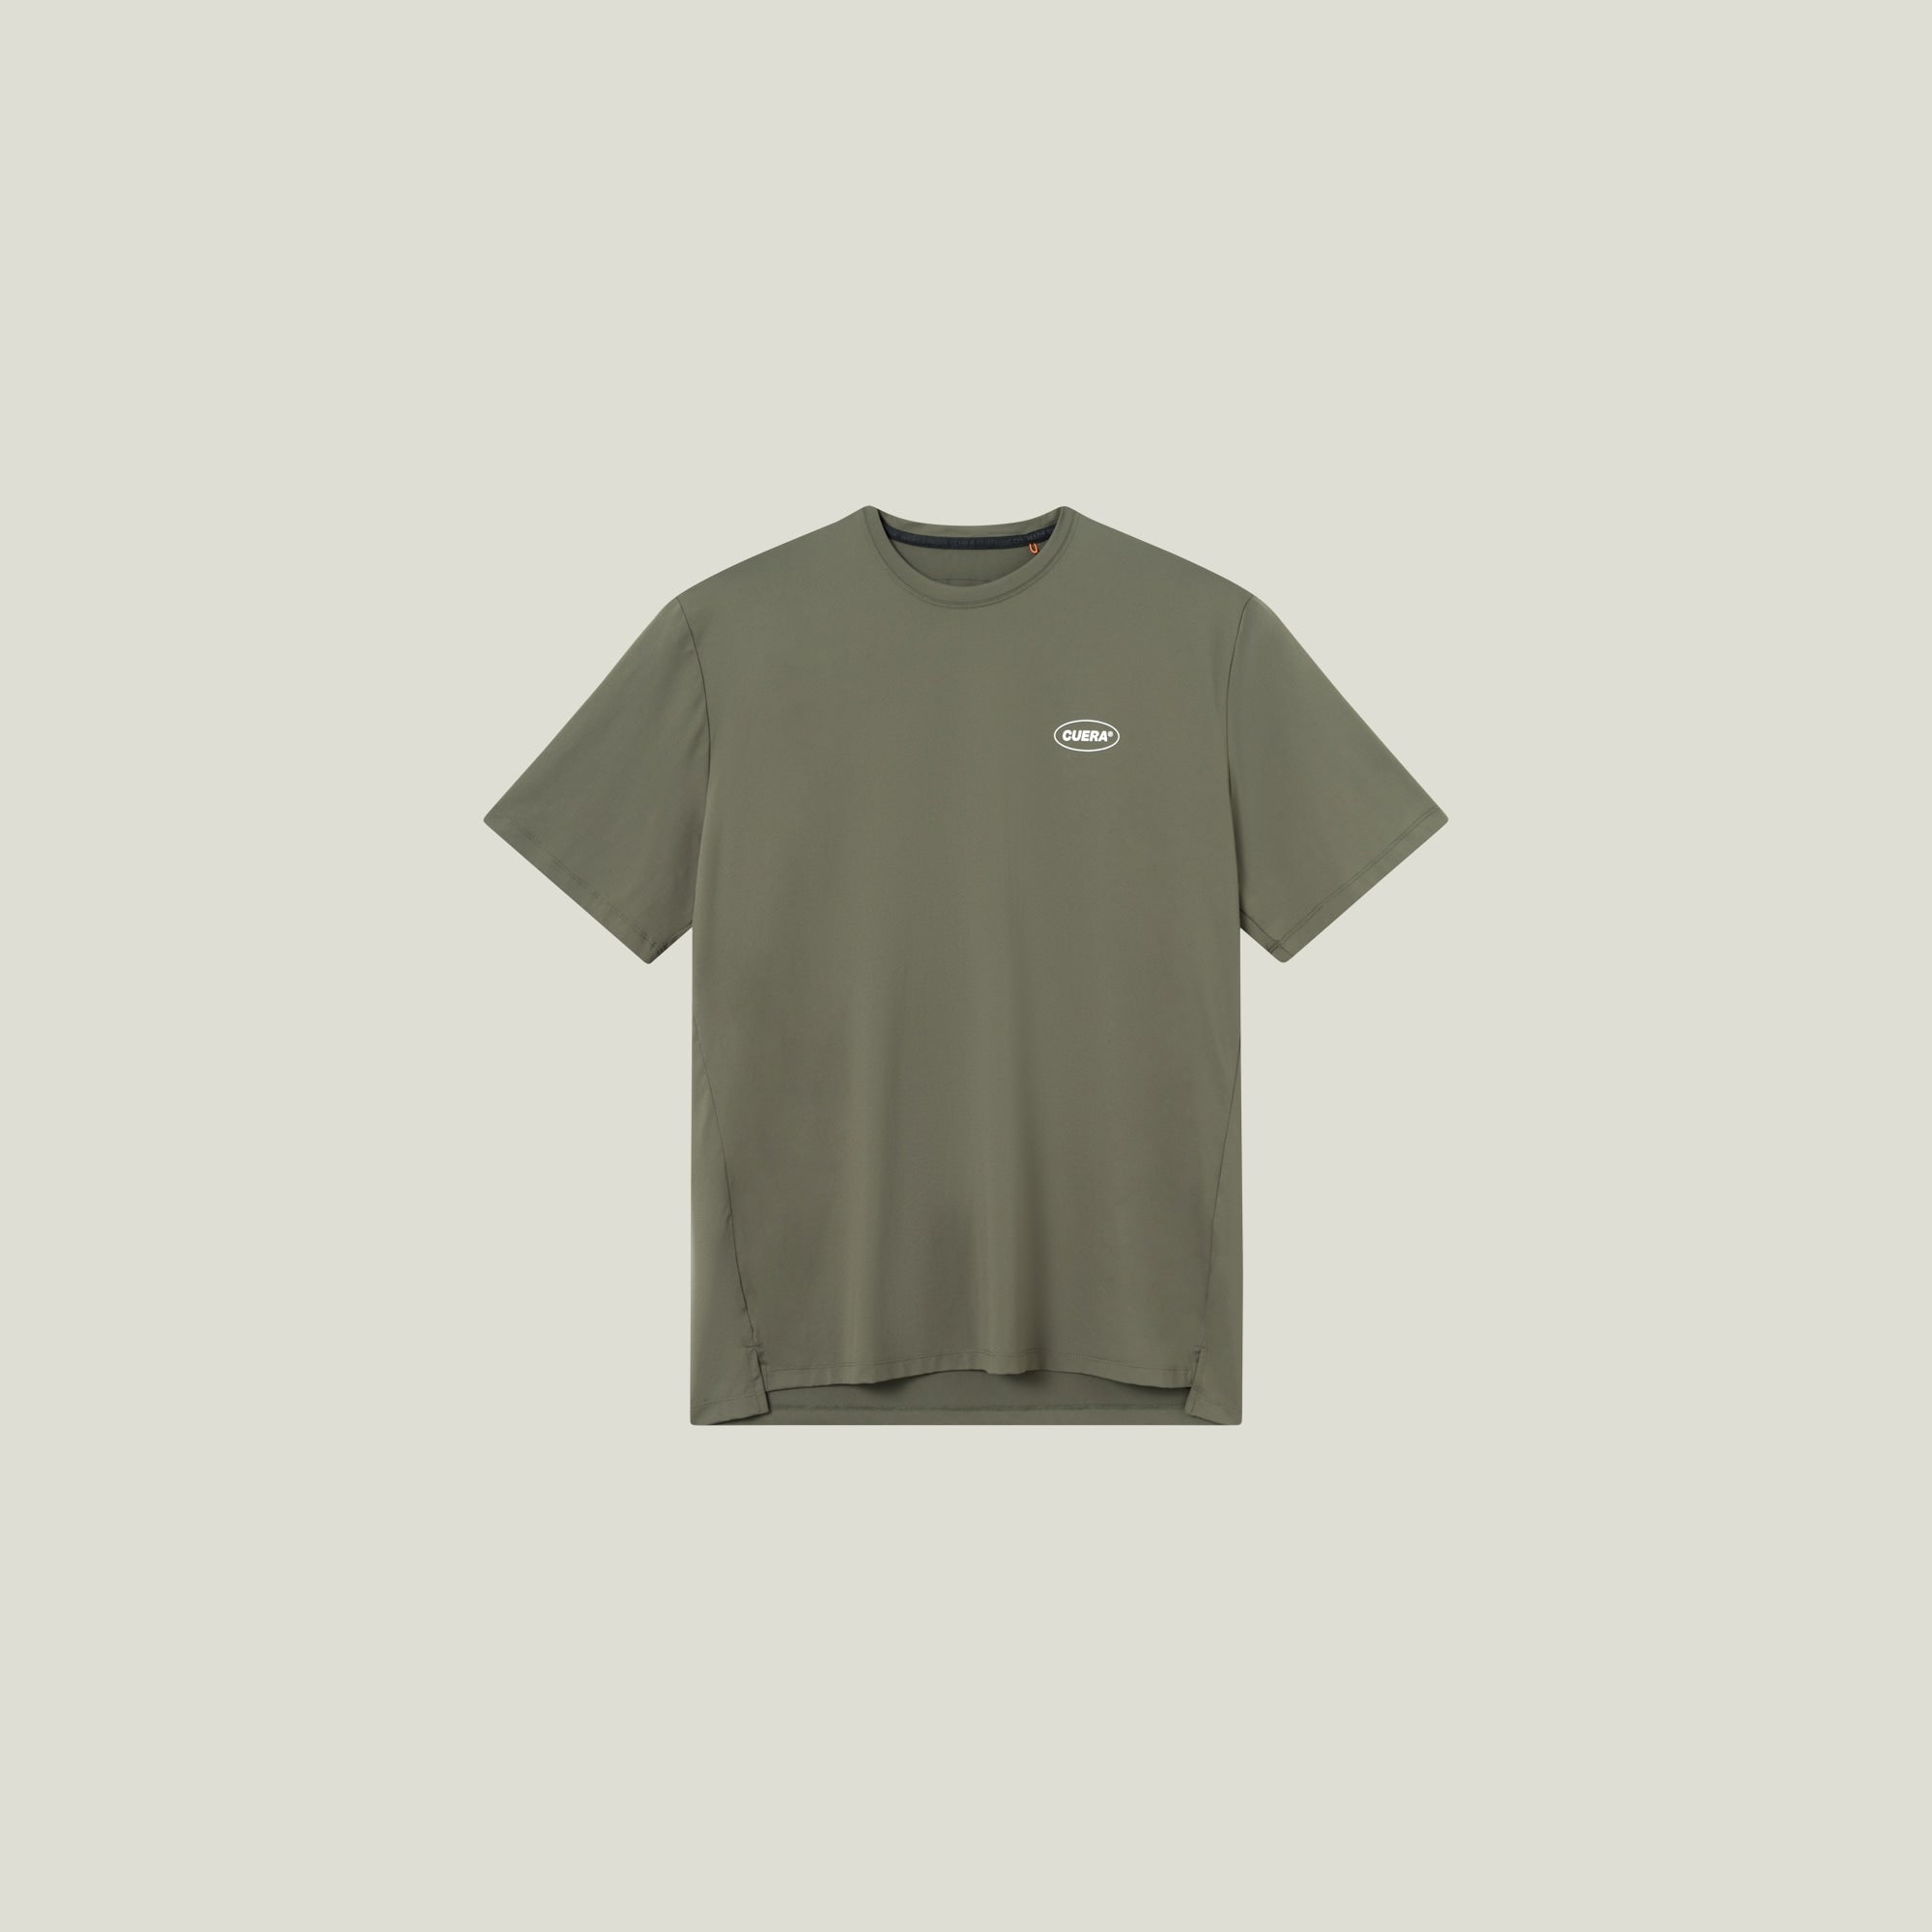 Oncourt Made T-Shirt - Army